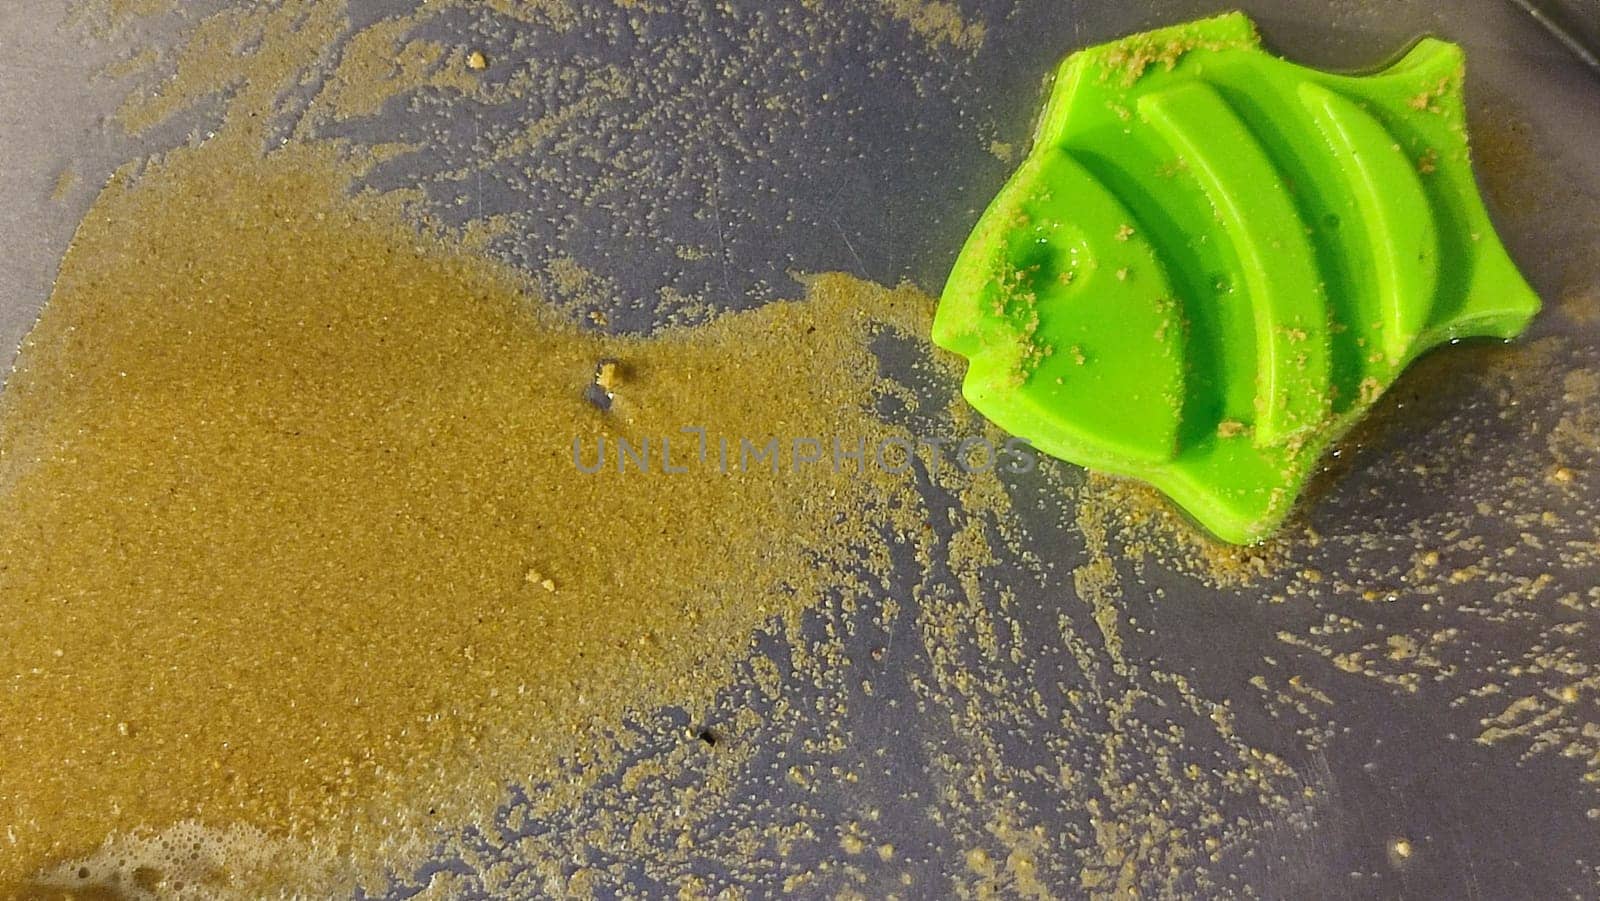 green plastic fish toy in the sand, children's toy, object, beach by Ply